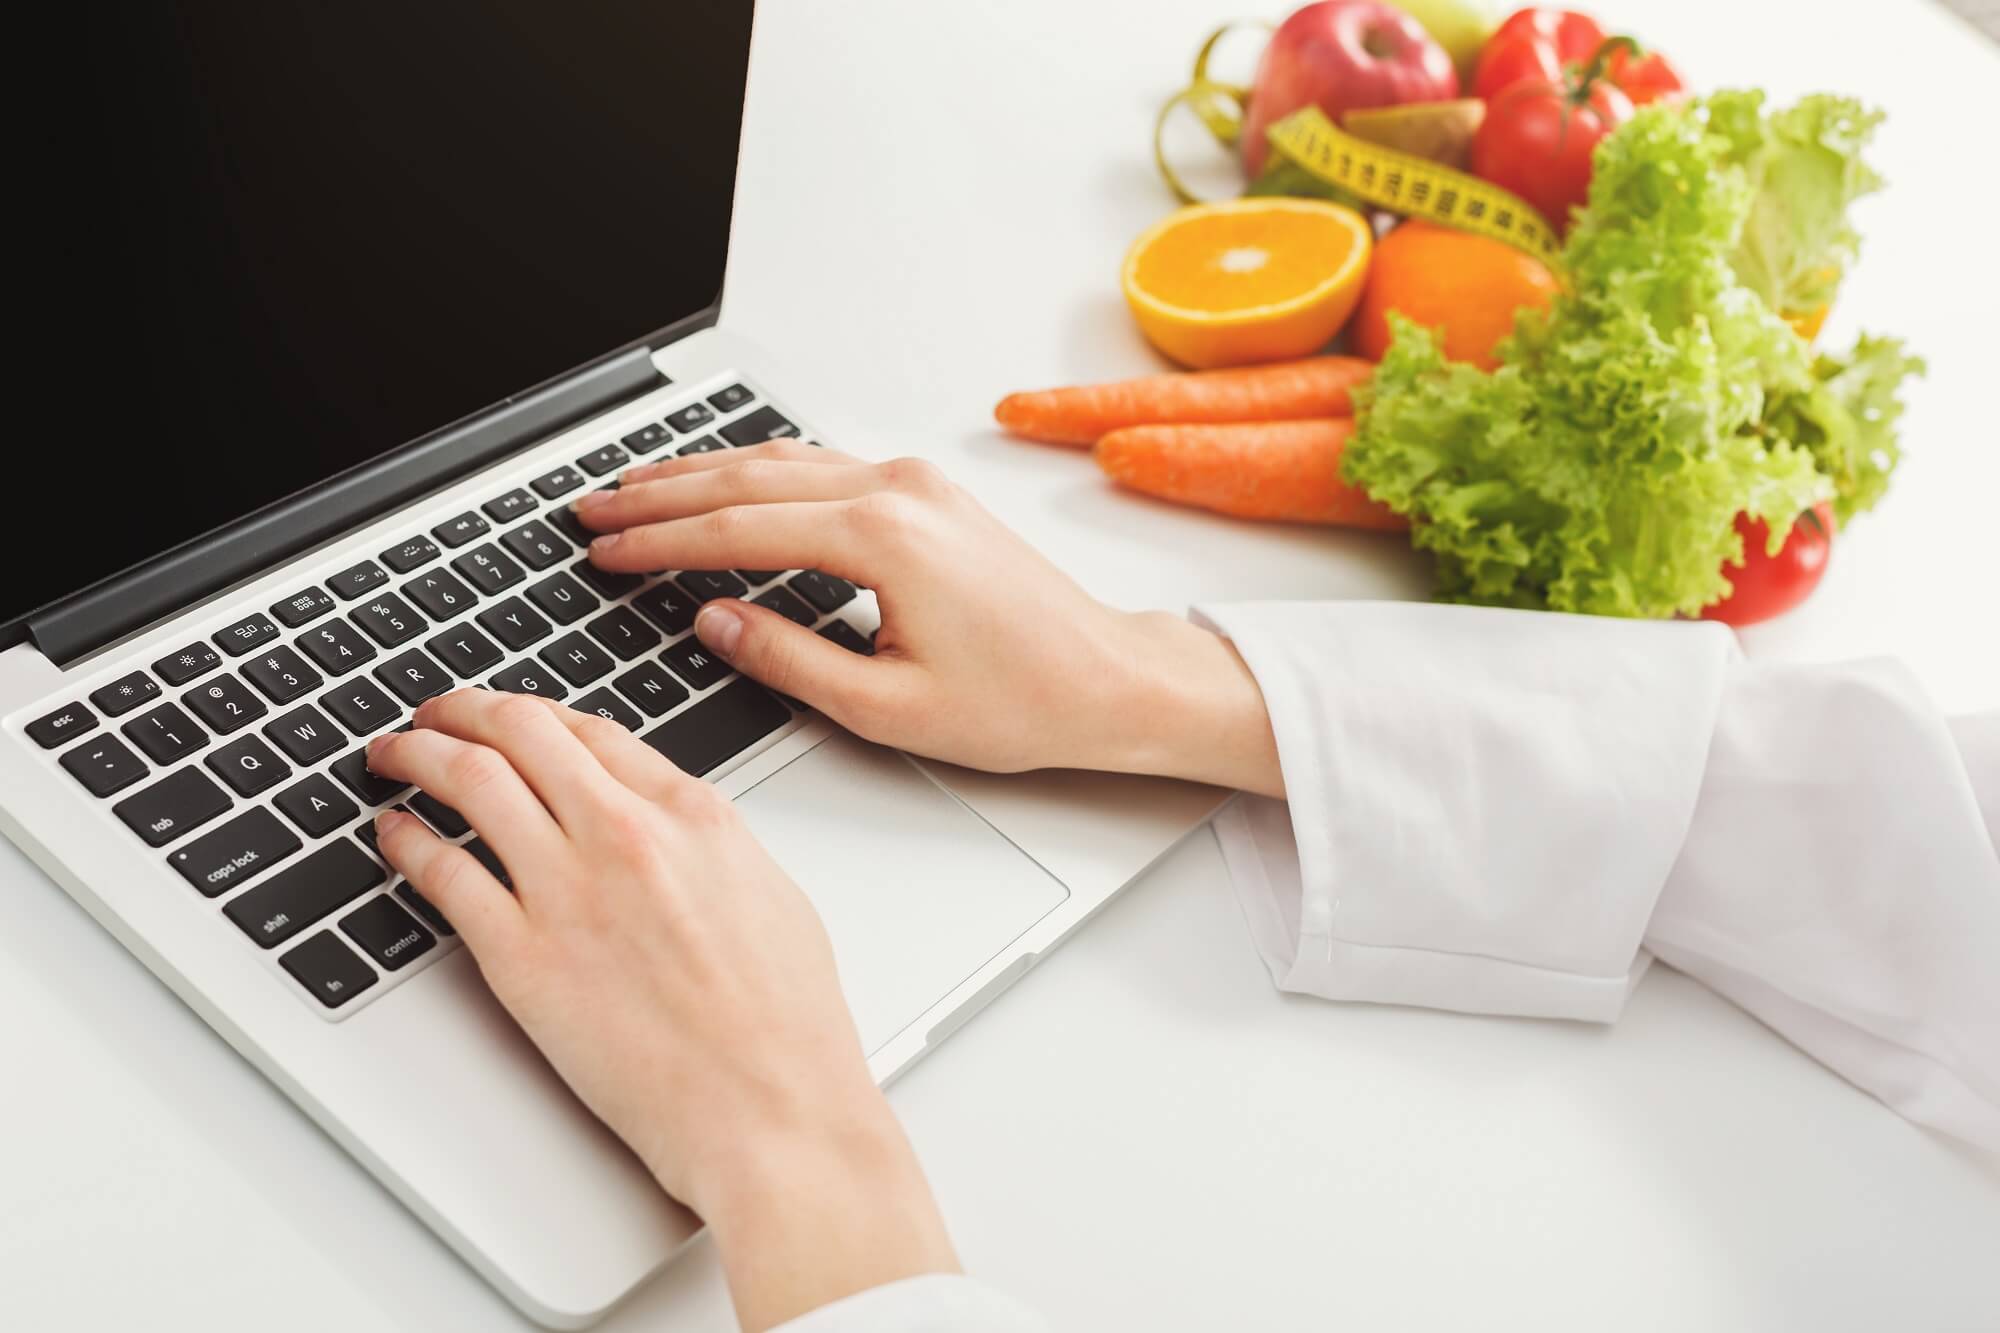 How To Find A Registered Dietitian Or Sports Nutritionist Near Me